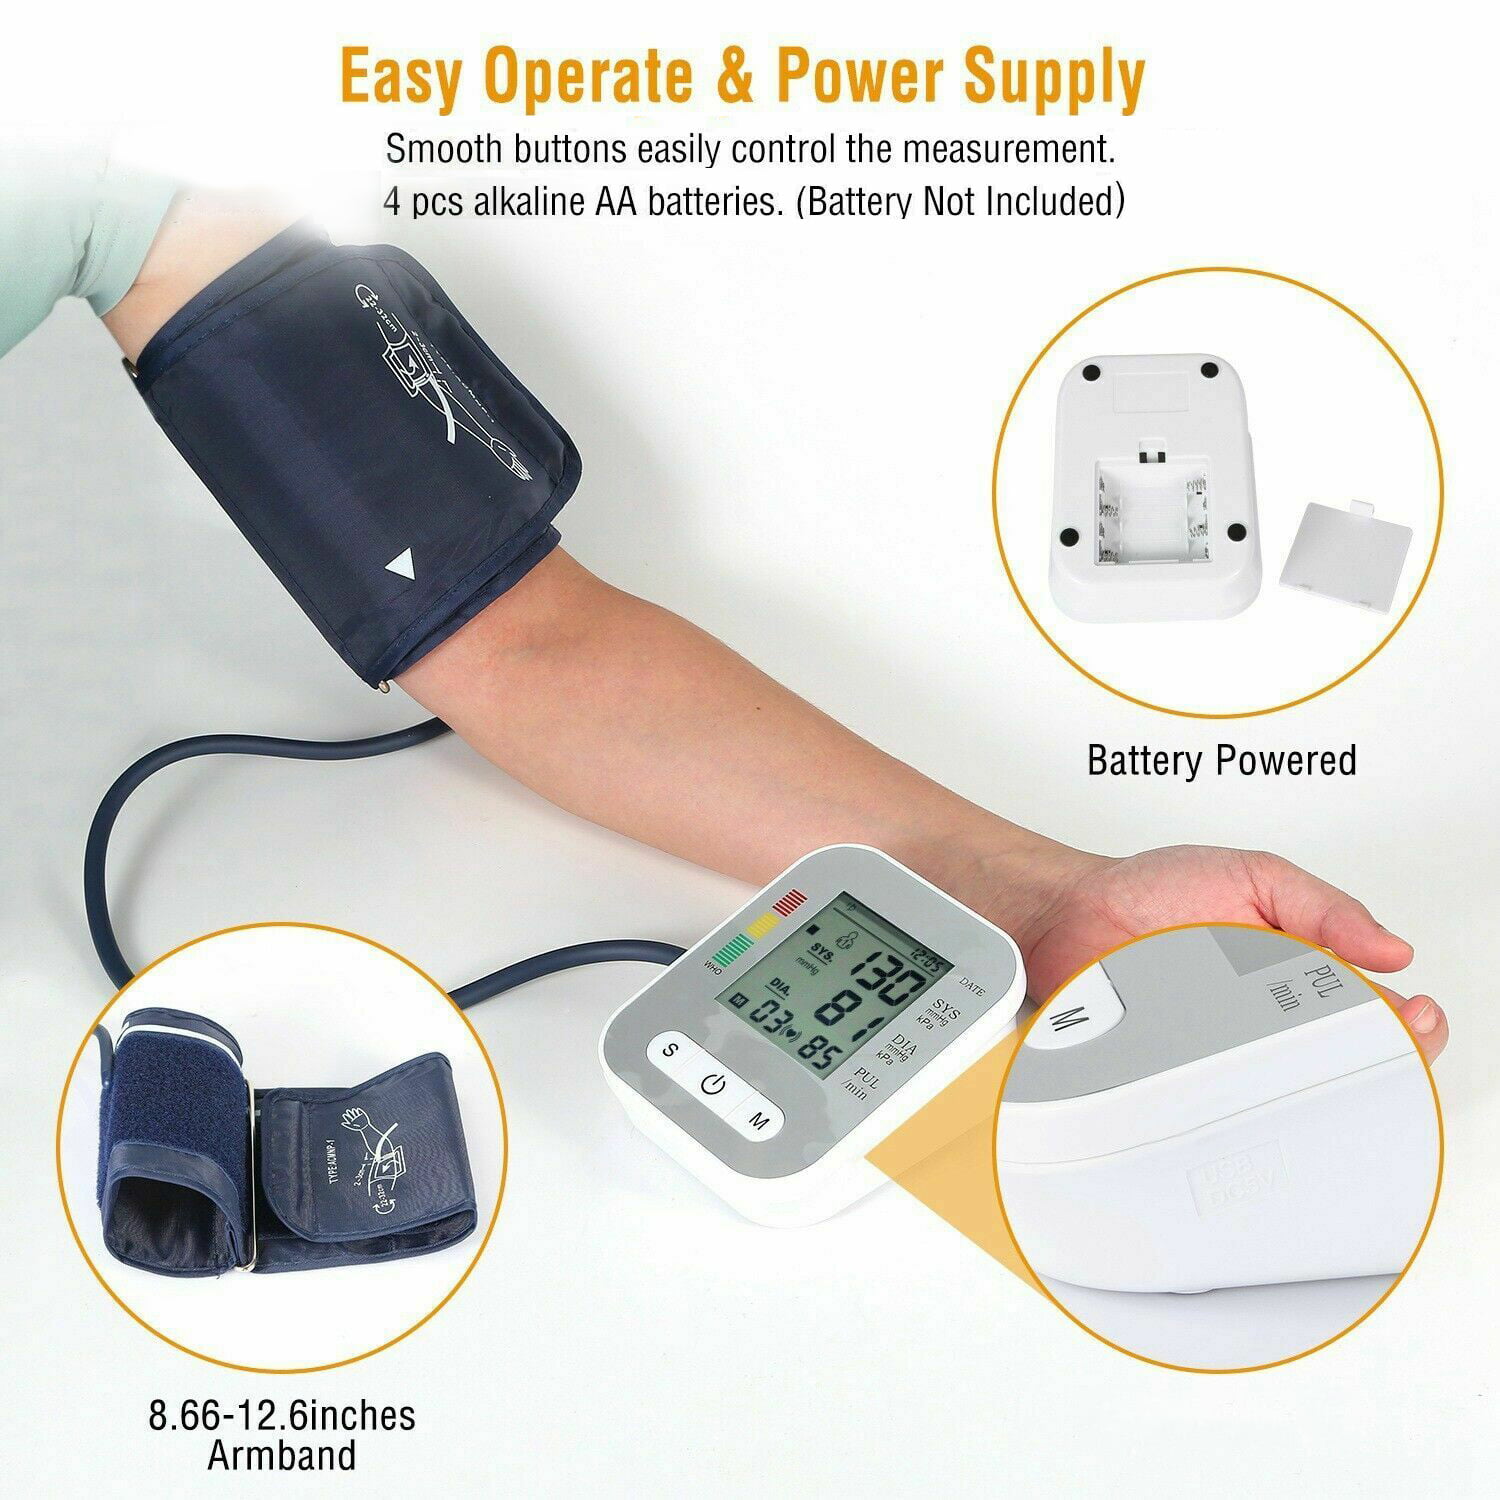 Buy Automatic Arm Style Electronic Blood Pressure Monitor - White (4xAAA  Batteries Not Included) at ShopLC.